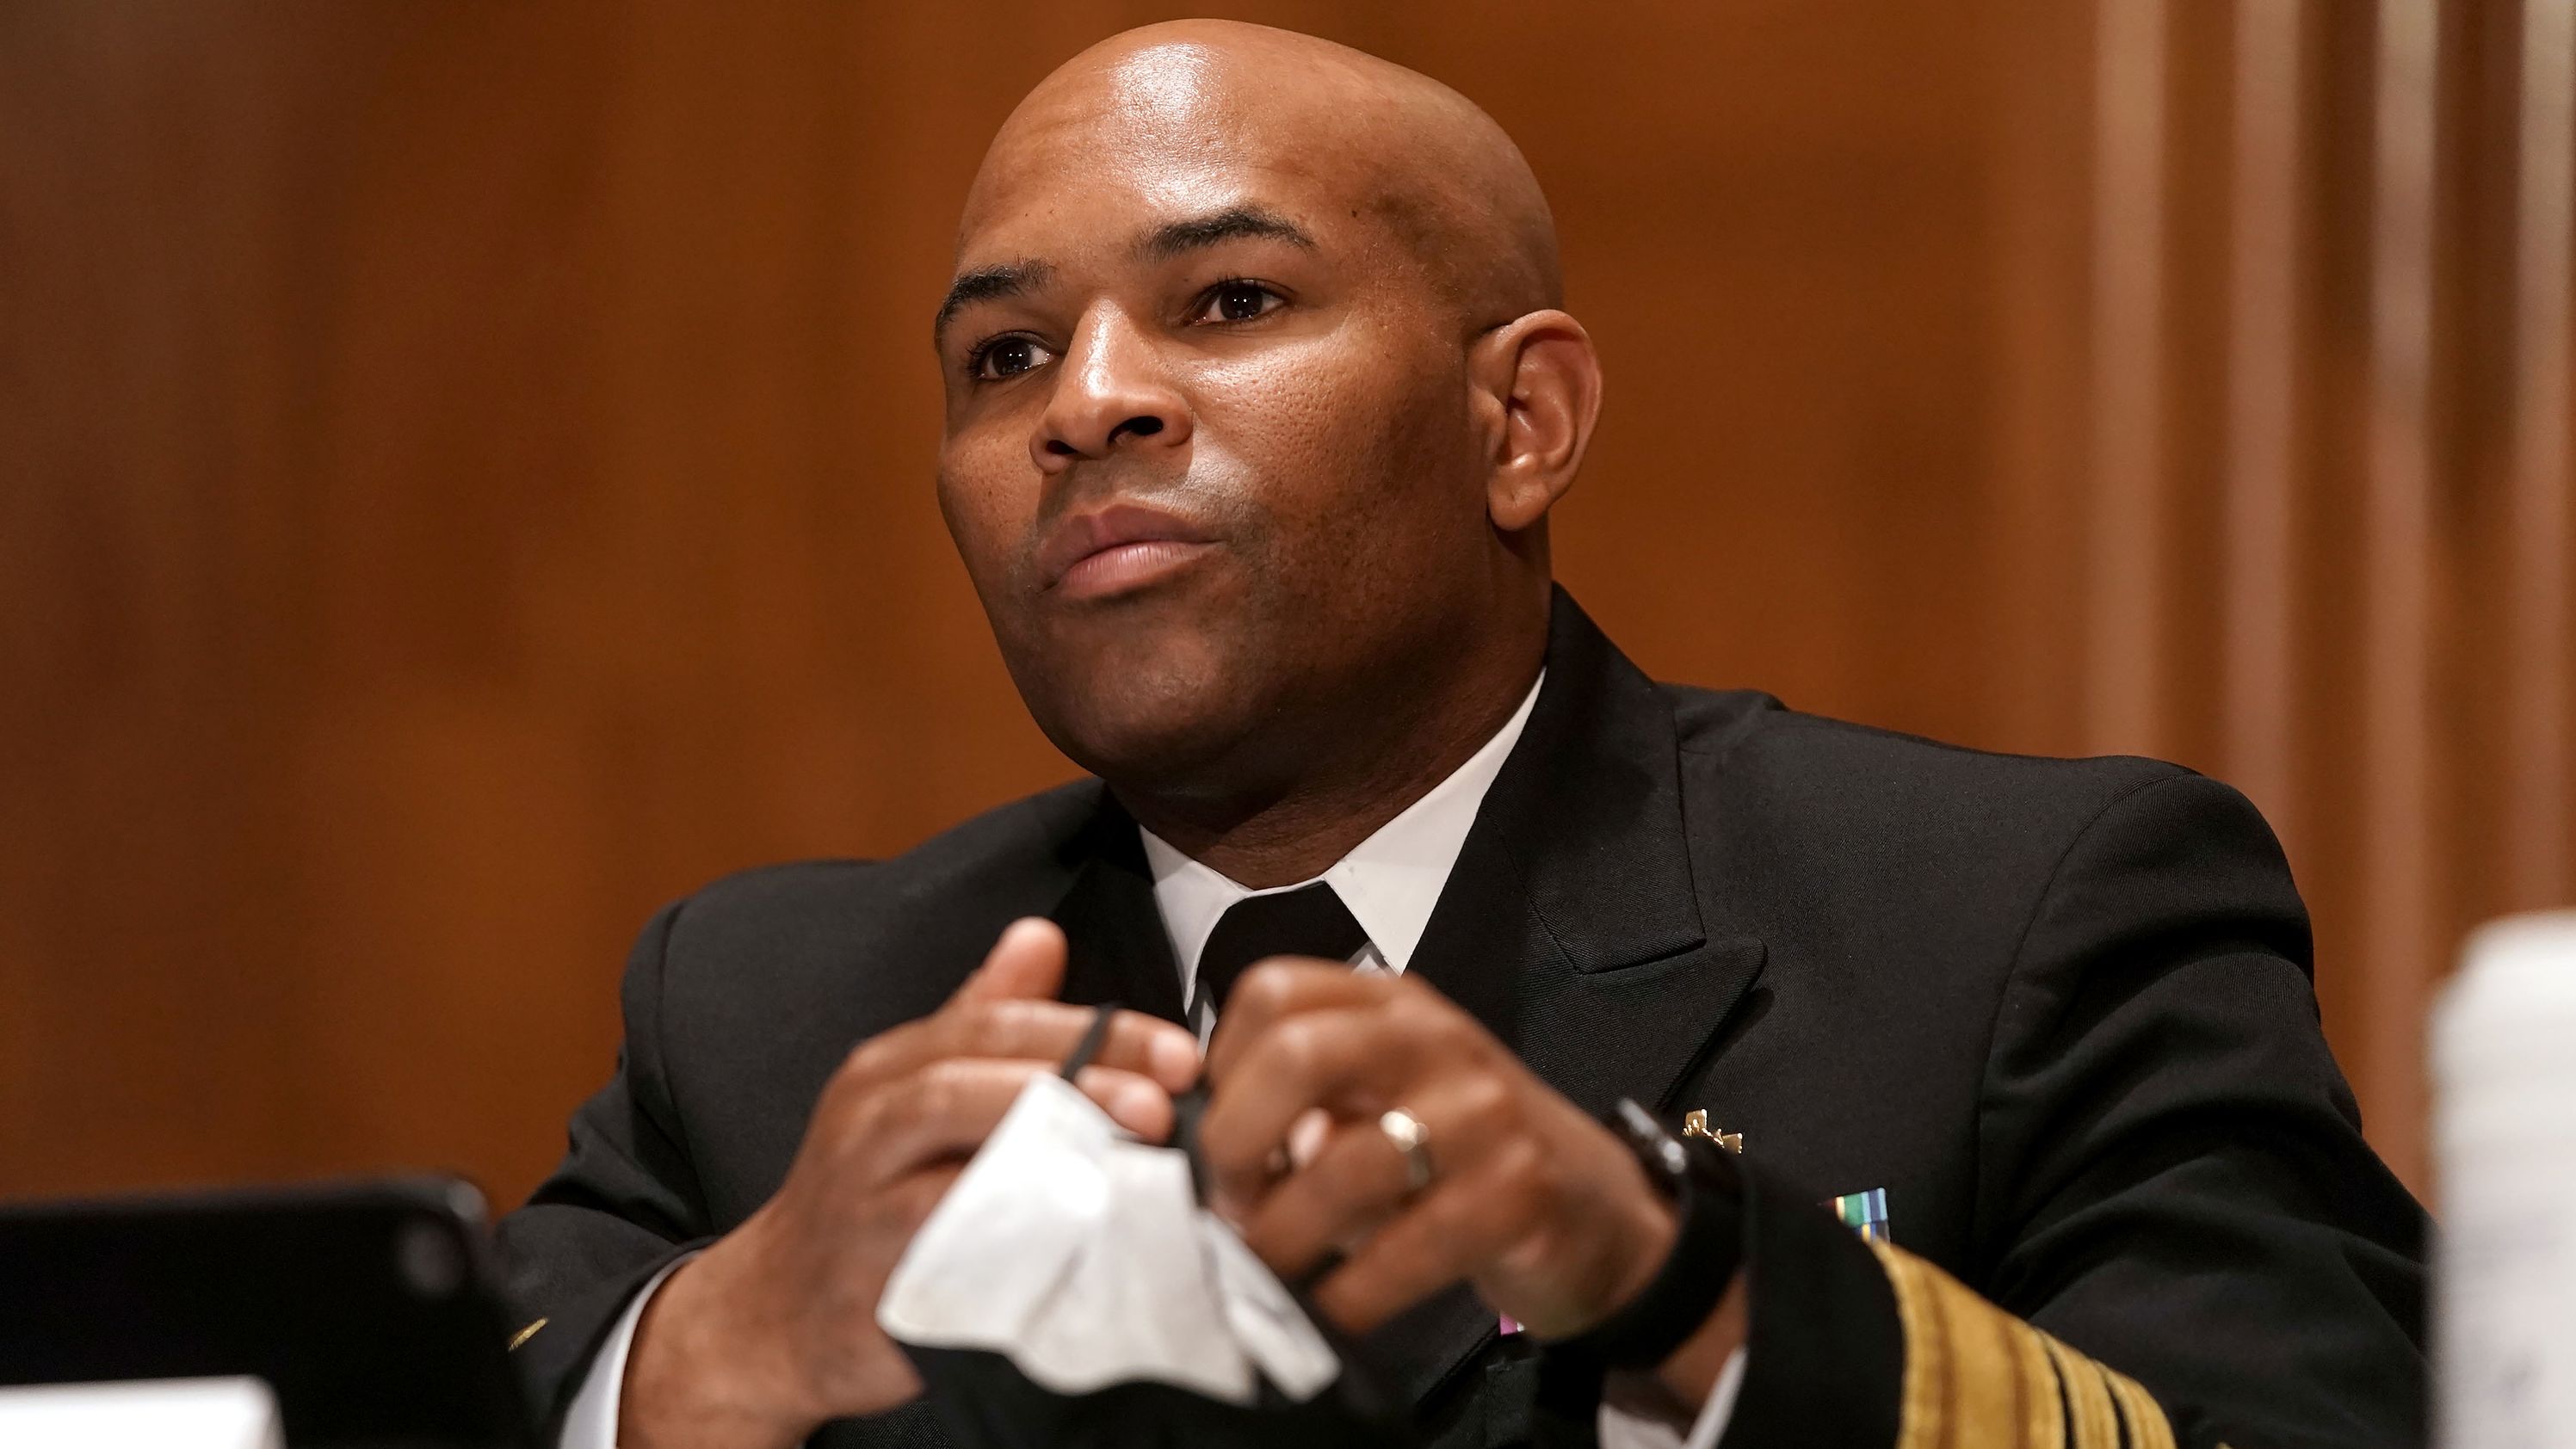 US Surgeon General Jerome Adams was given a criminal citation during a visit to Hawaii.